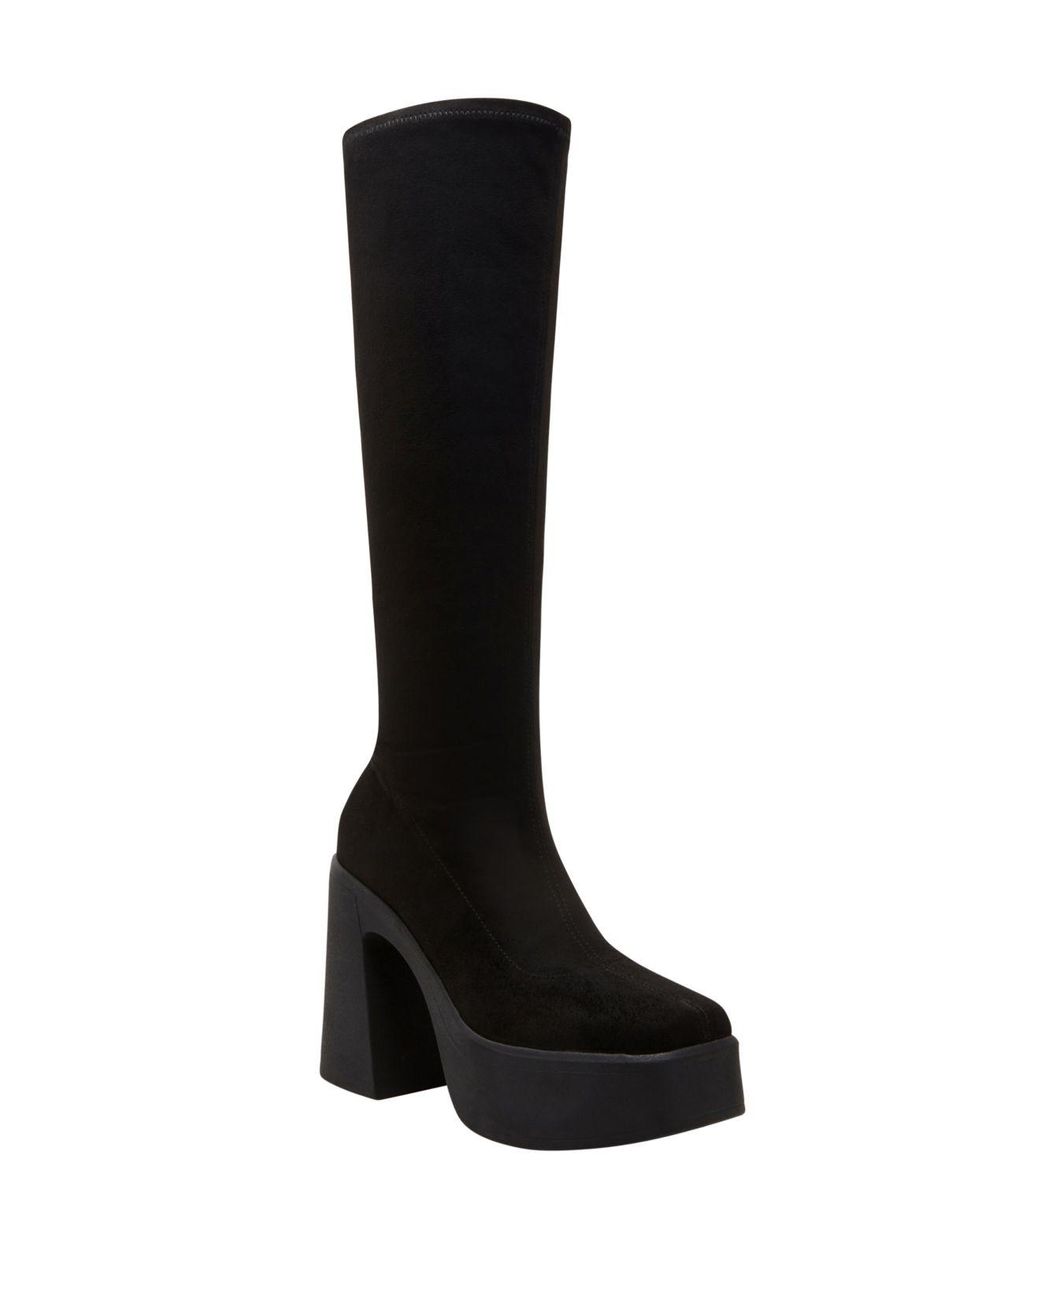 Katy Perry The Heightten Narrow Calf Stretch Boots in Black | Lyst